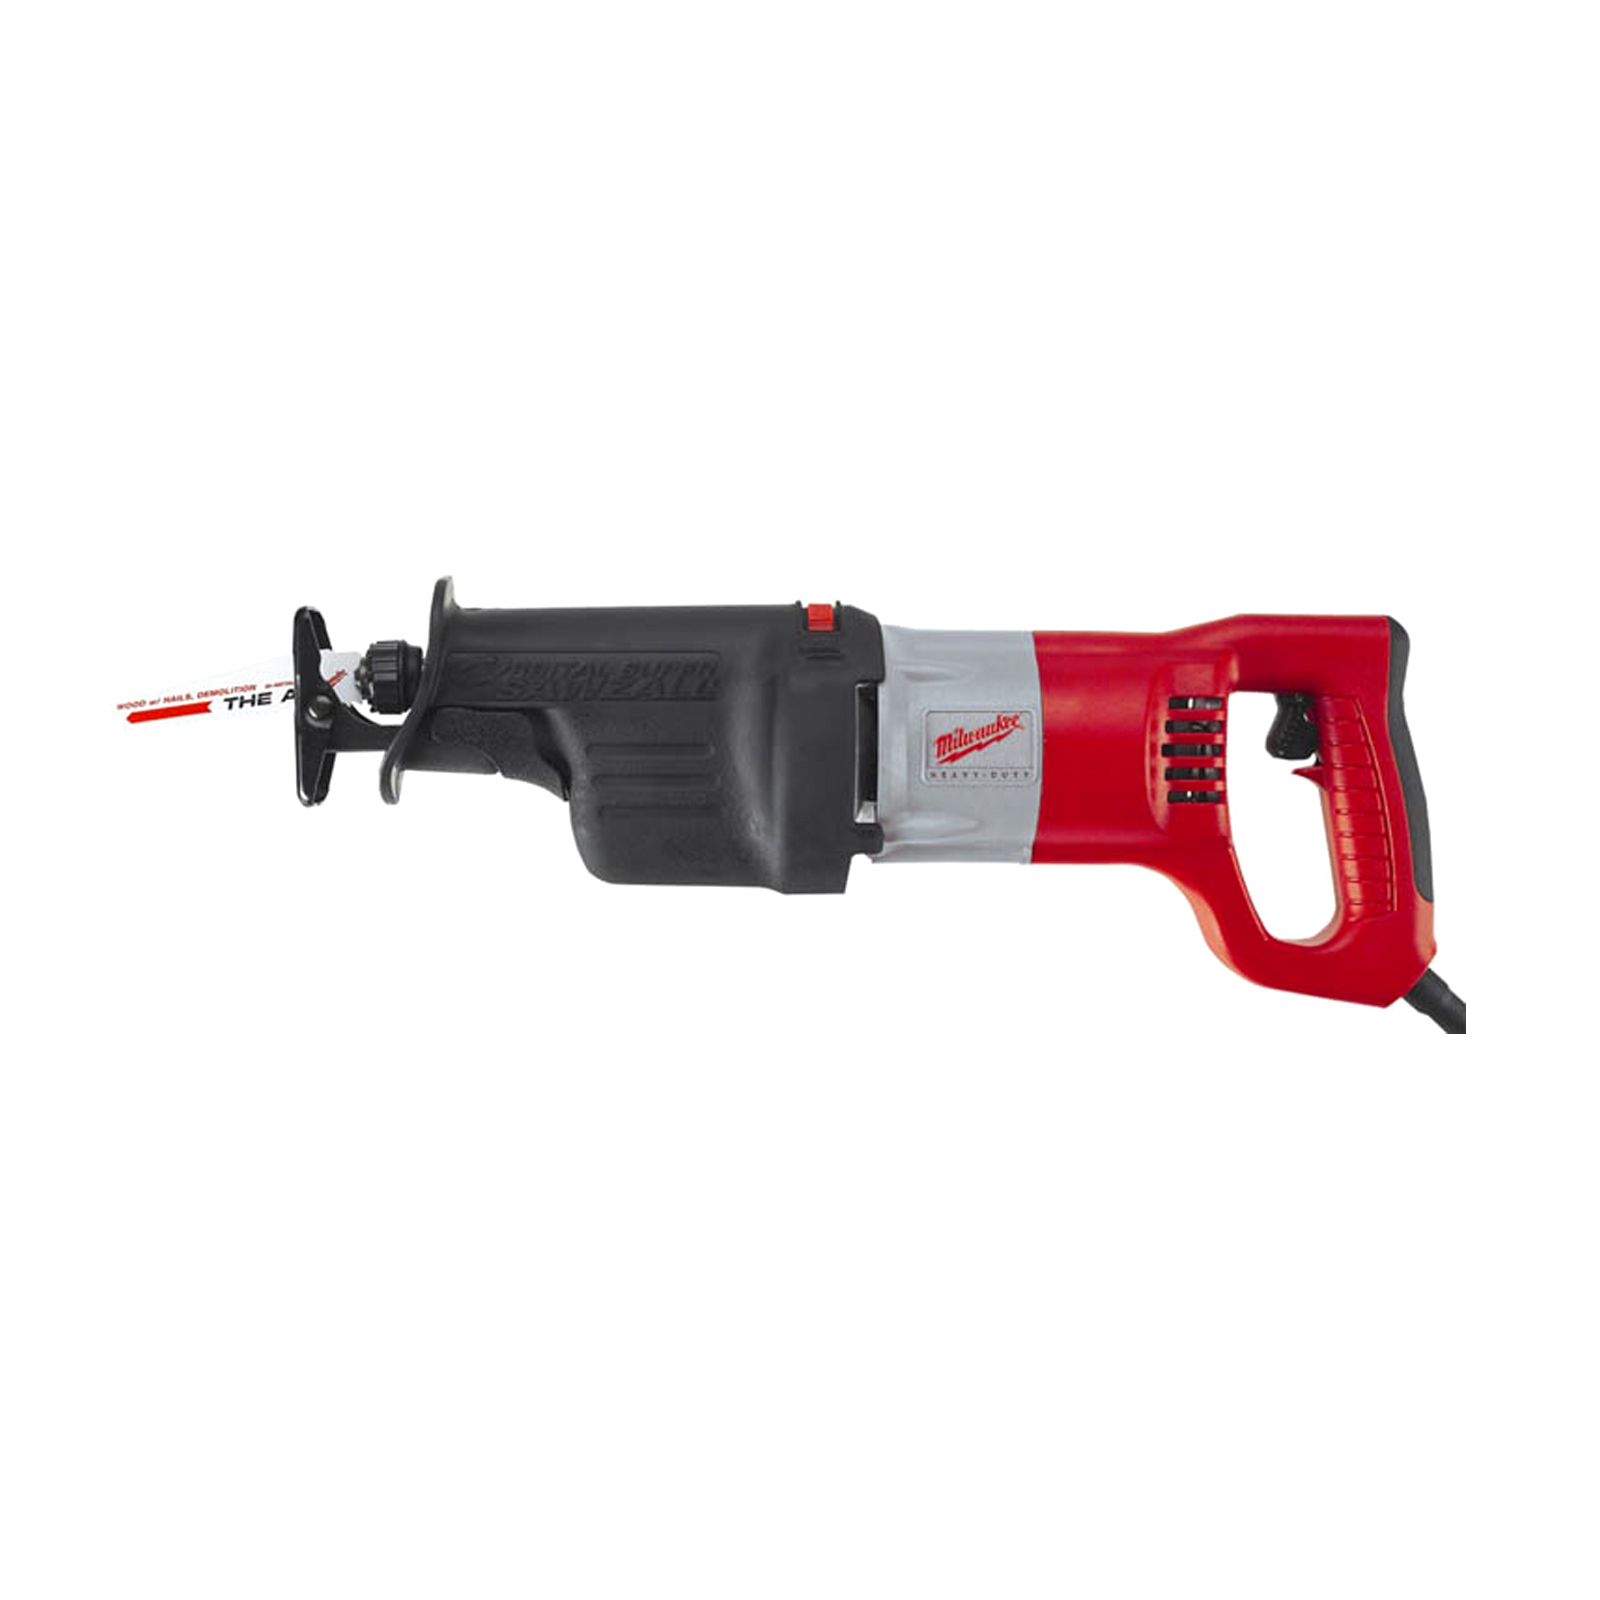 Milwaukee 13A Corded 1-1/4" Reciprocating Saw